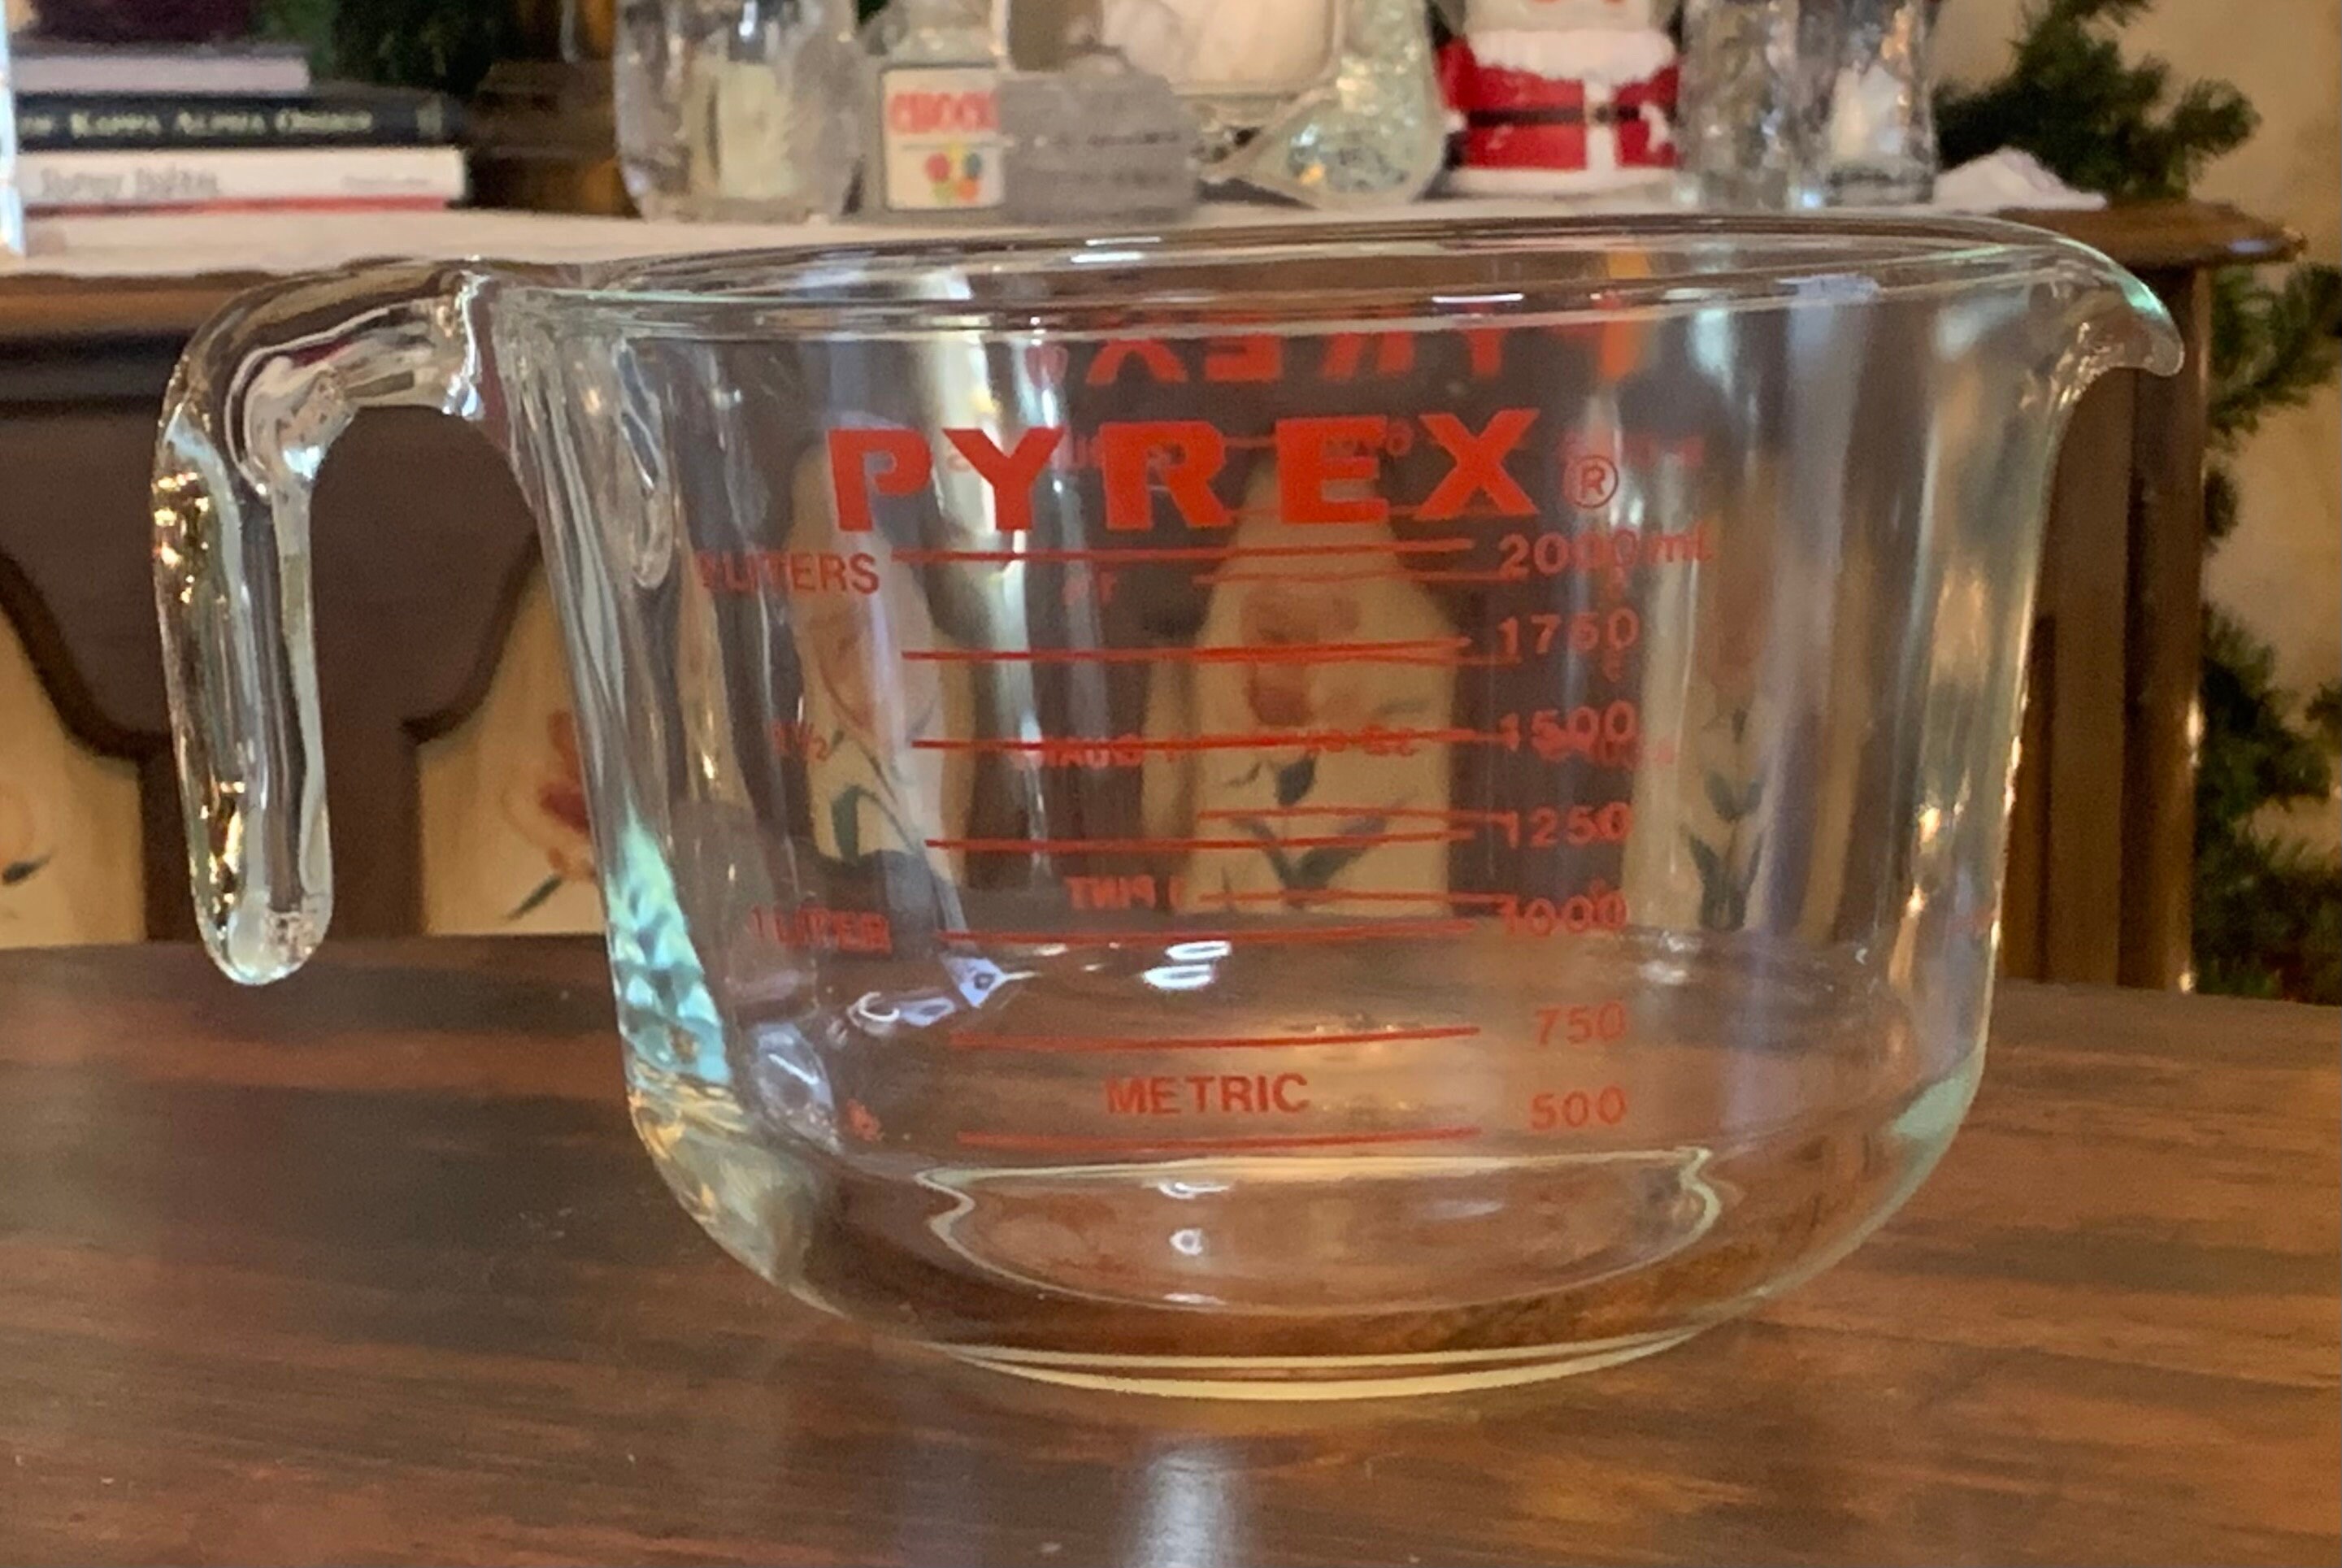 VINTAGE PYREX 2 QT. 8 CUP LARGE GLASS MEASURING CUP WITH HANDLE, MADE IN USA